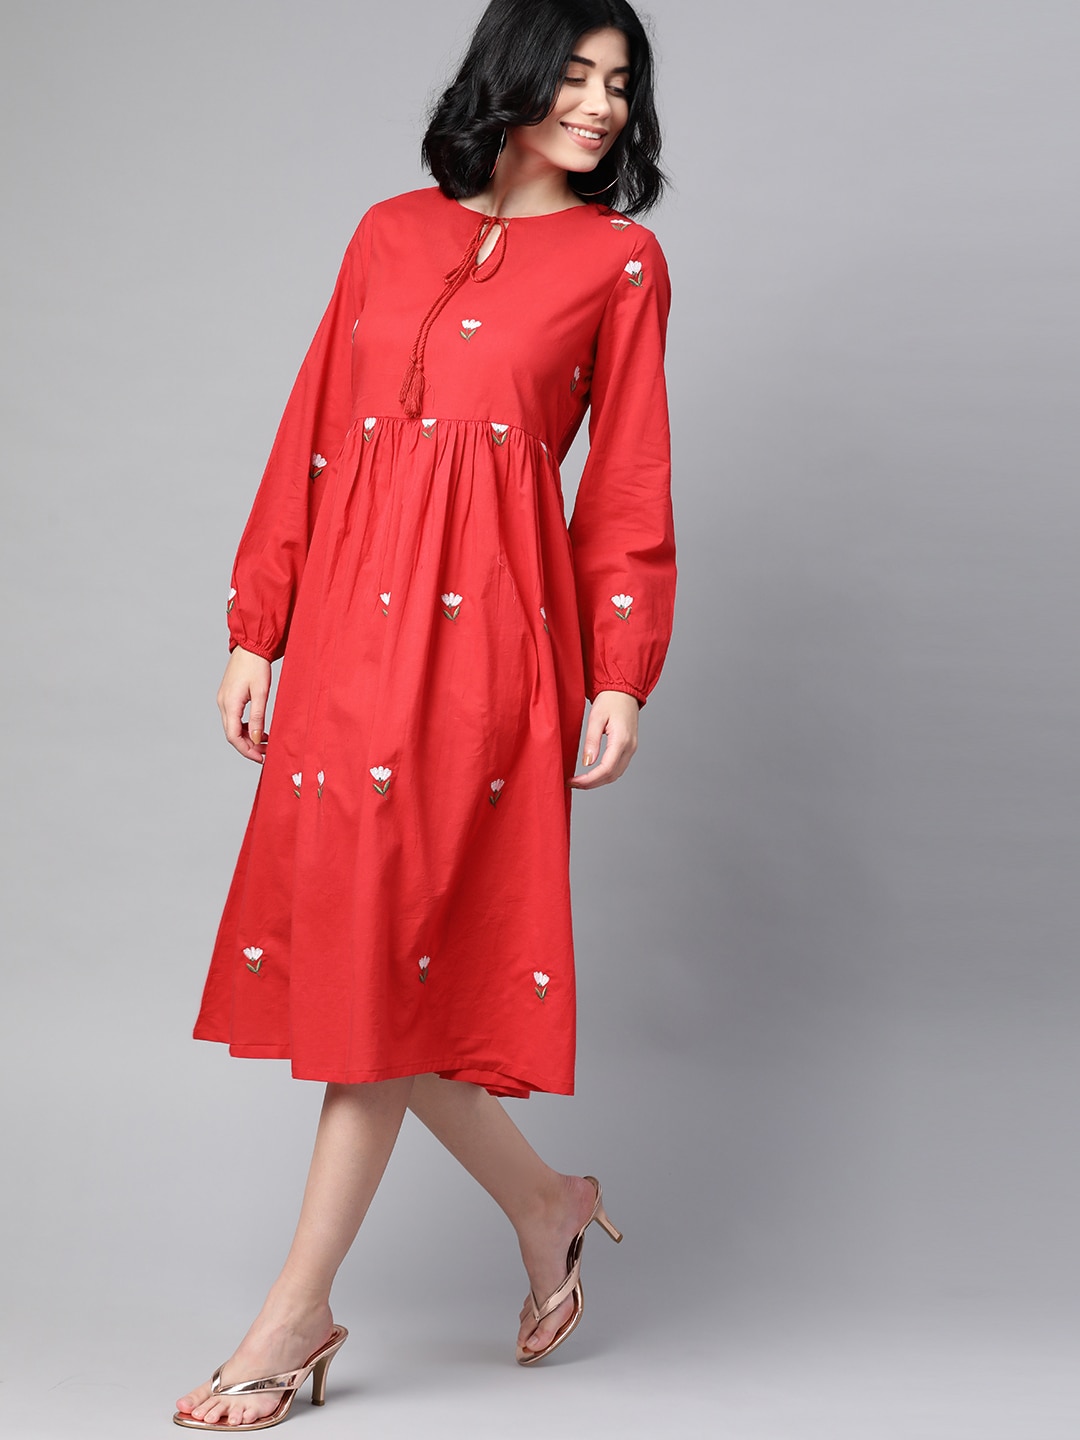 HERE&NOW Red & White Pure Cotton Floral Embroidered Tie-Up Neck Ethnic A-Line Midi Dress Price in India